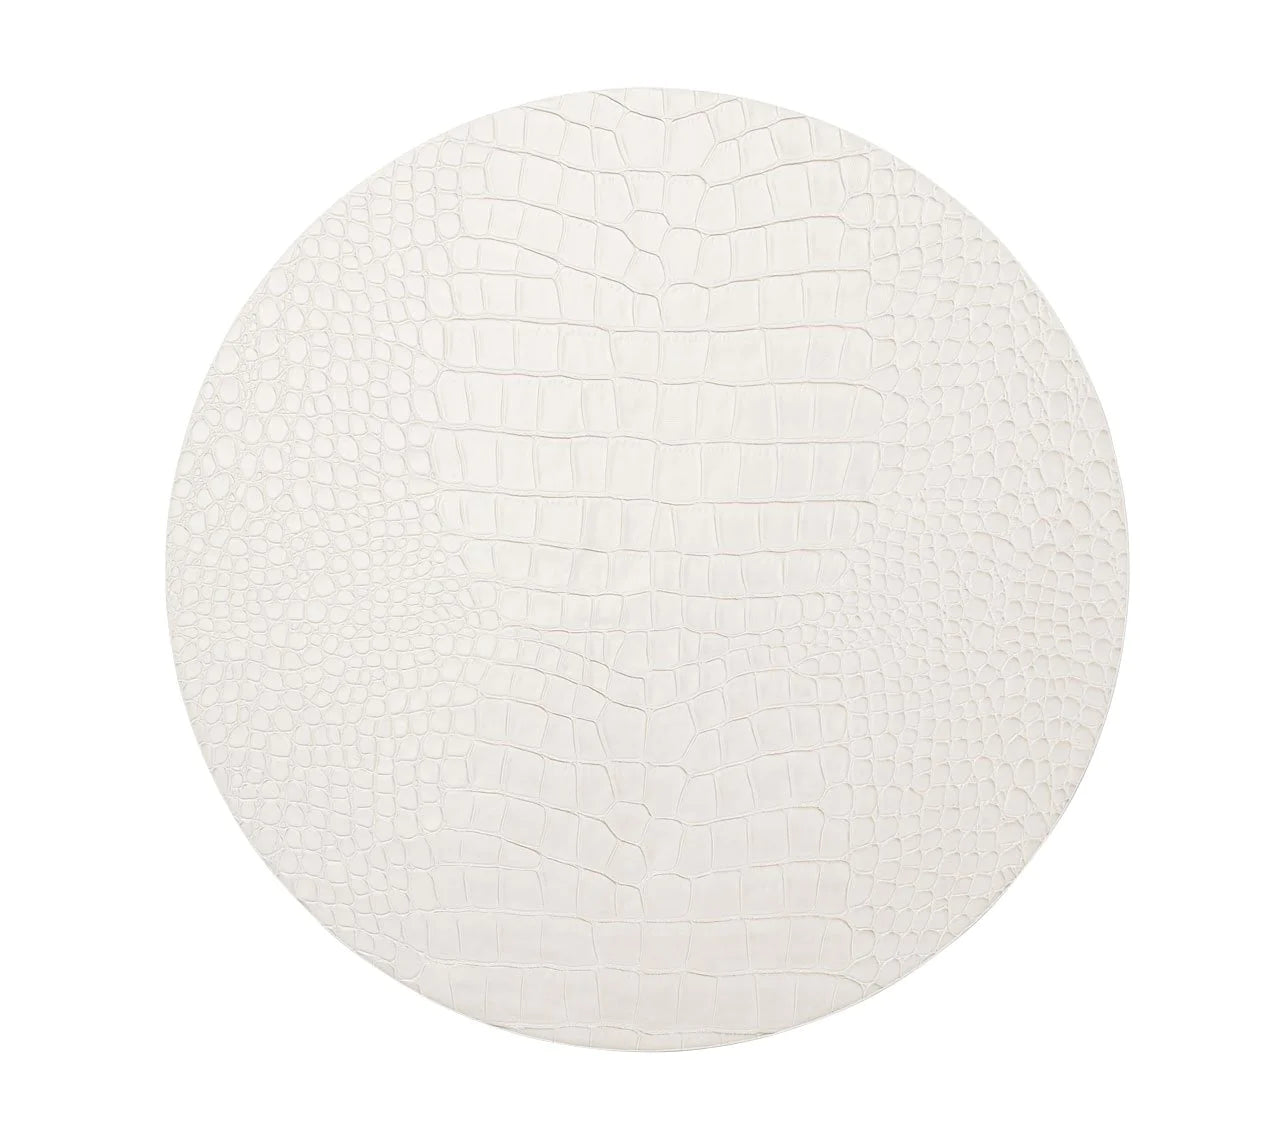 KIM SEYBERT PLACEMAT ROUND CROCO (Available in 3 Colors)